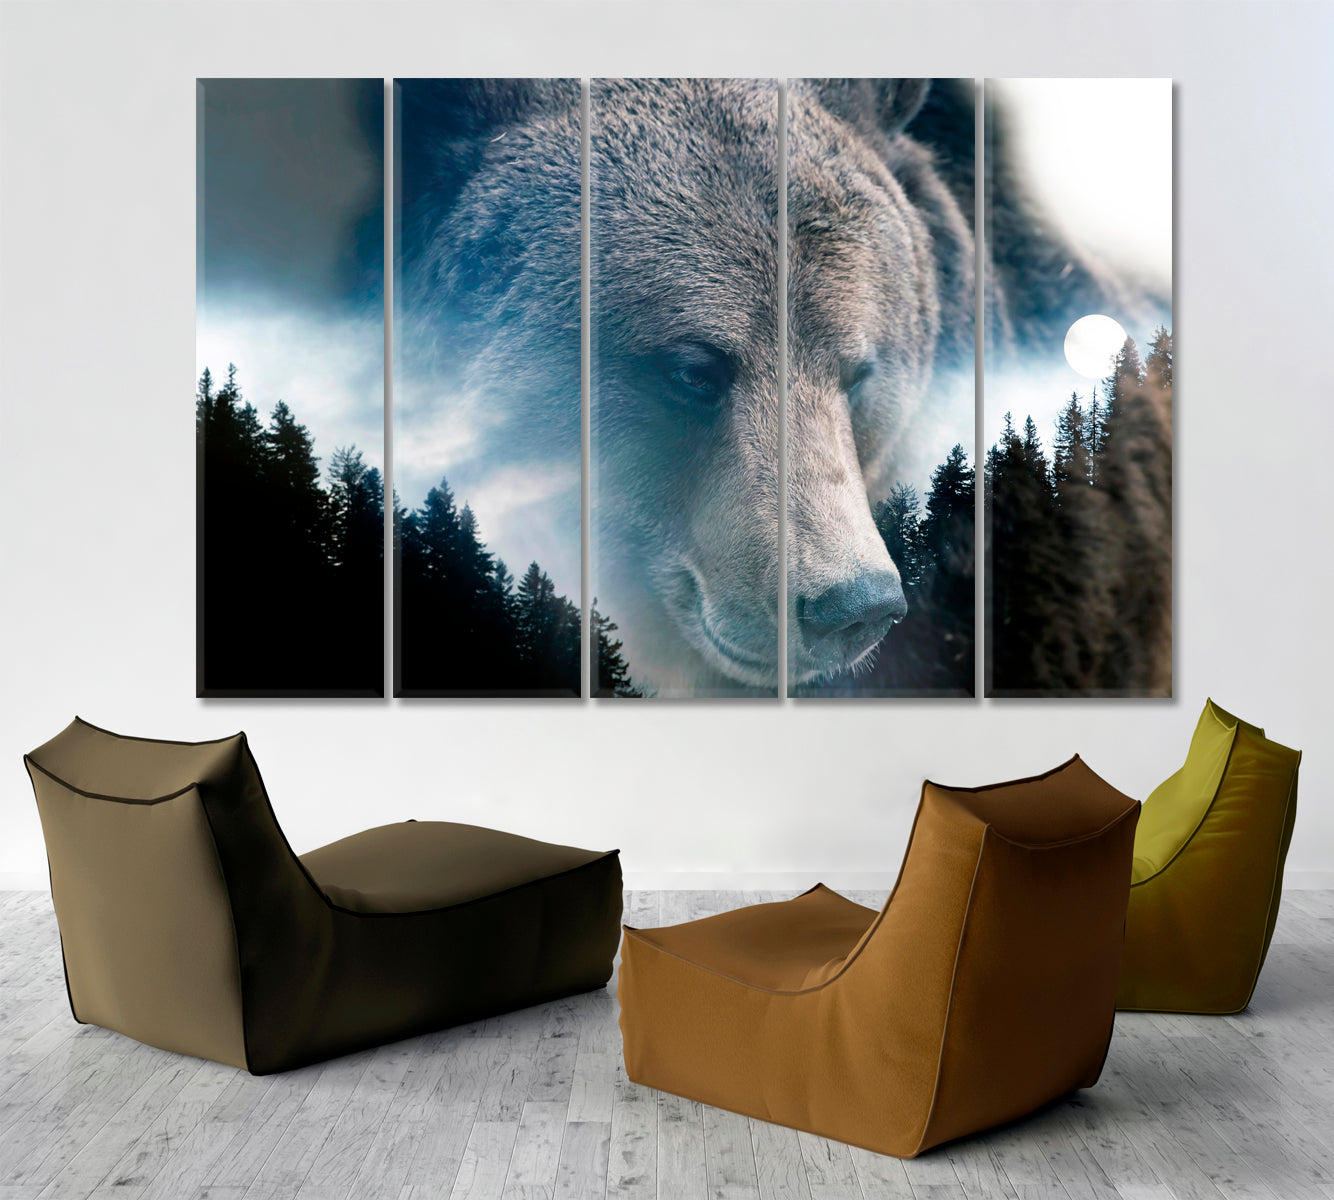 Wild Bear And A Pine Forest Double Exposure Photo Art Artesty 5 panels 36" x 24" 